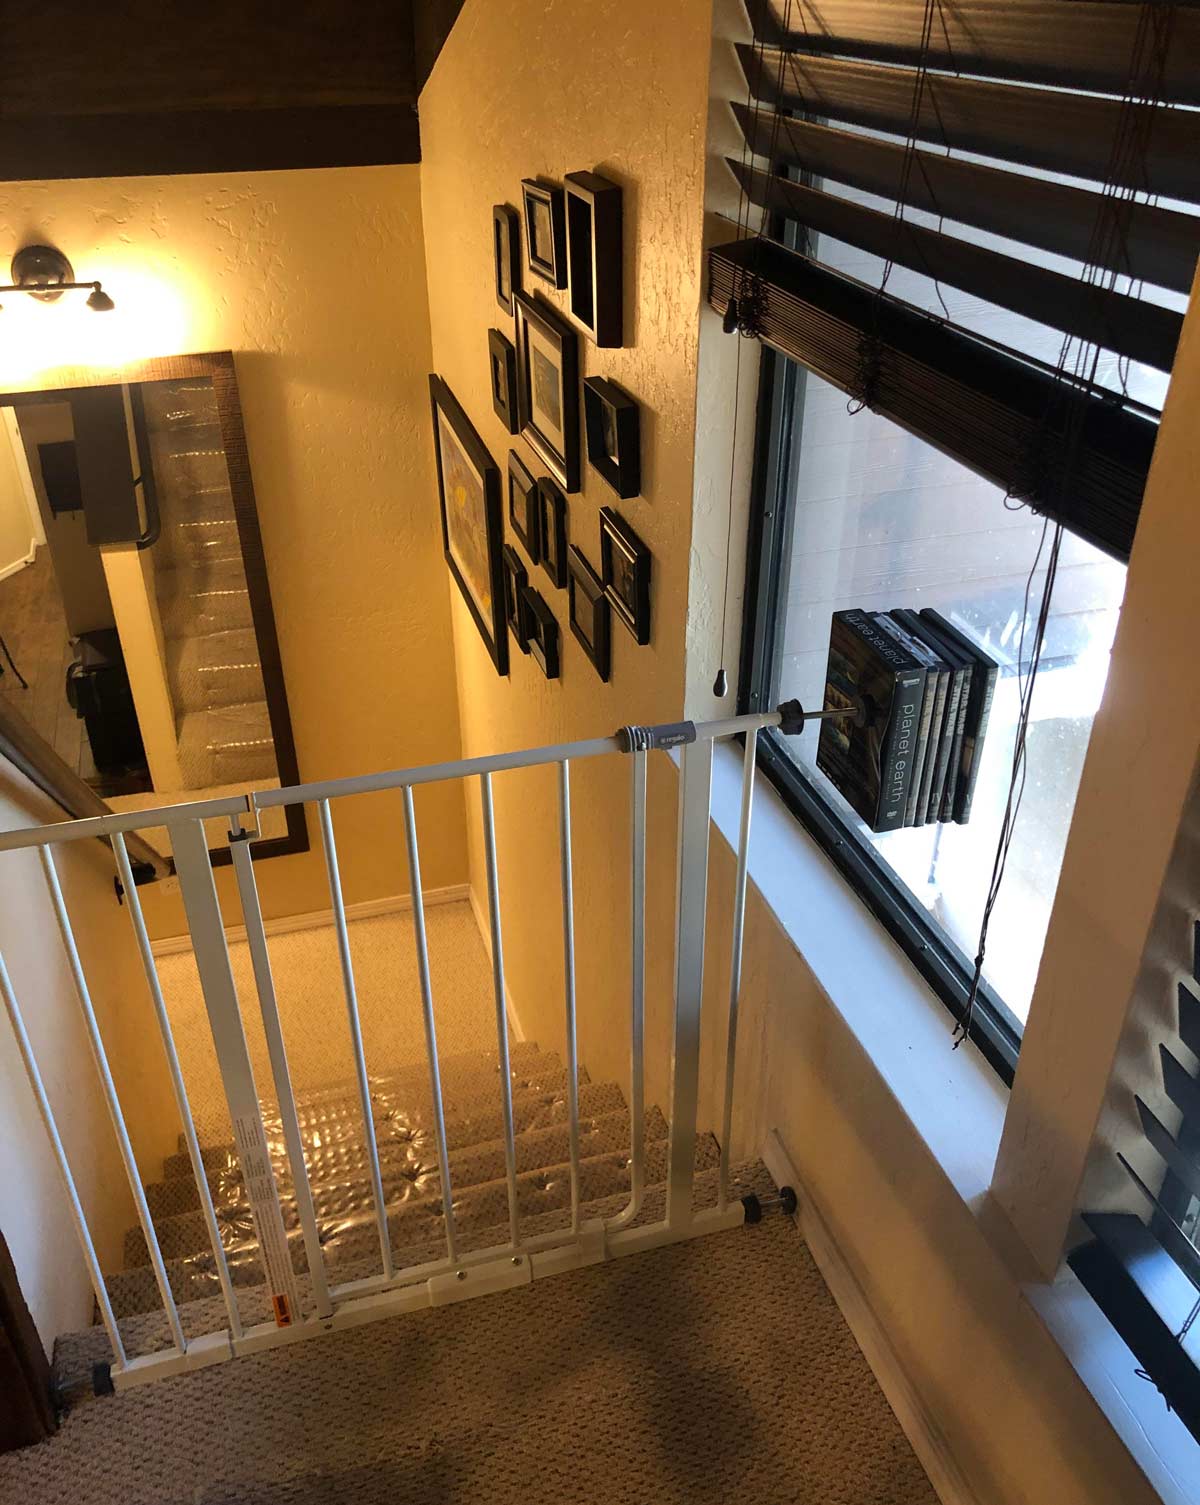 My airbnb assured me they have a “very safe” baby gate